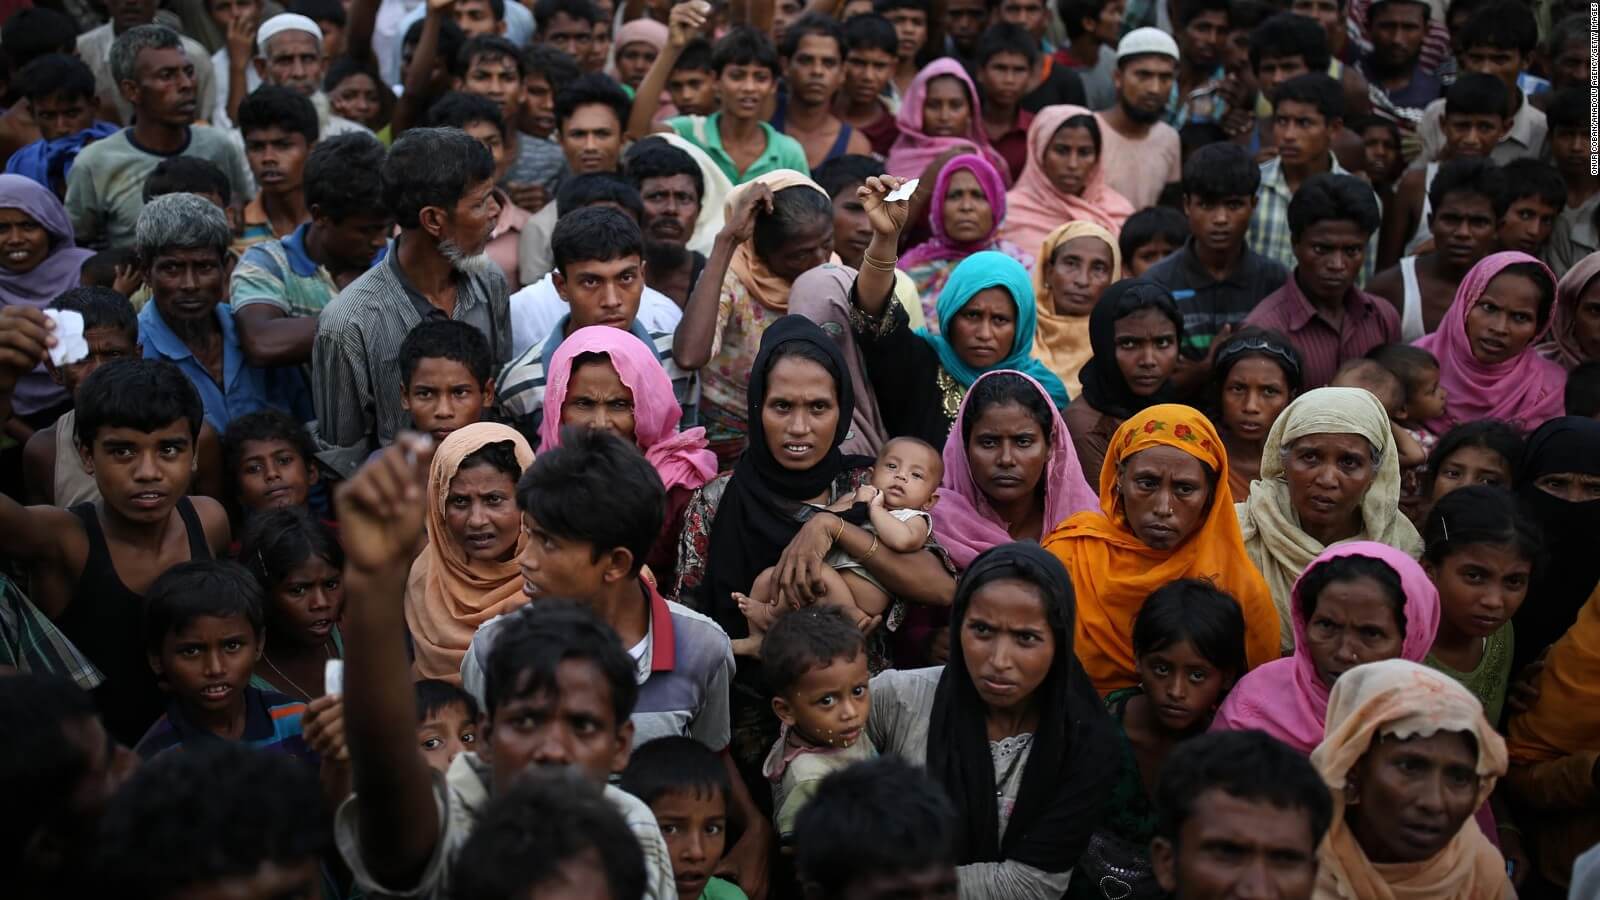 Myanmar’s Military Coup Will Further Exacerbate the Plight of the Rohingya